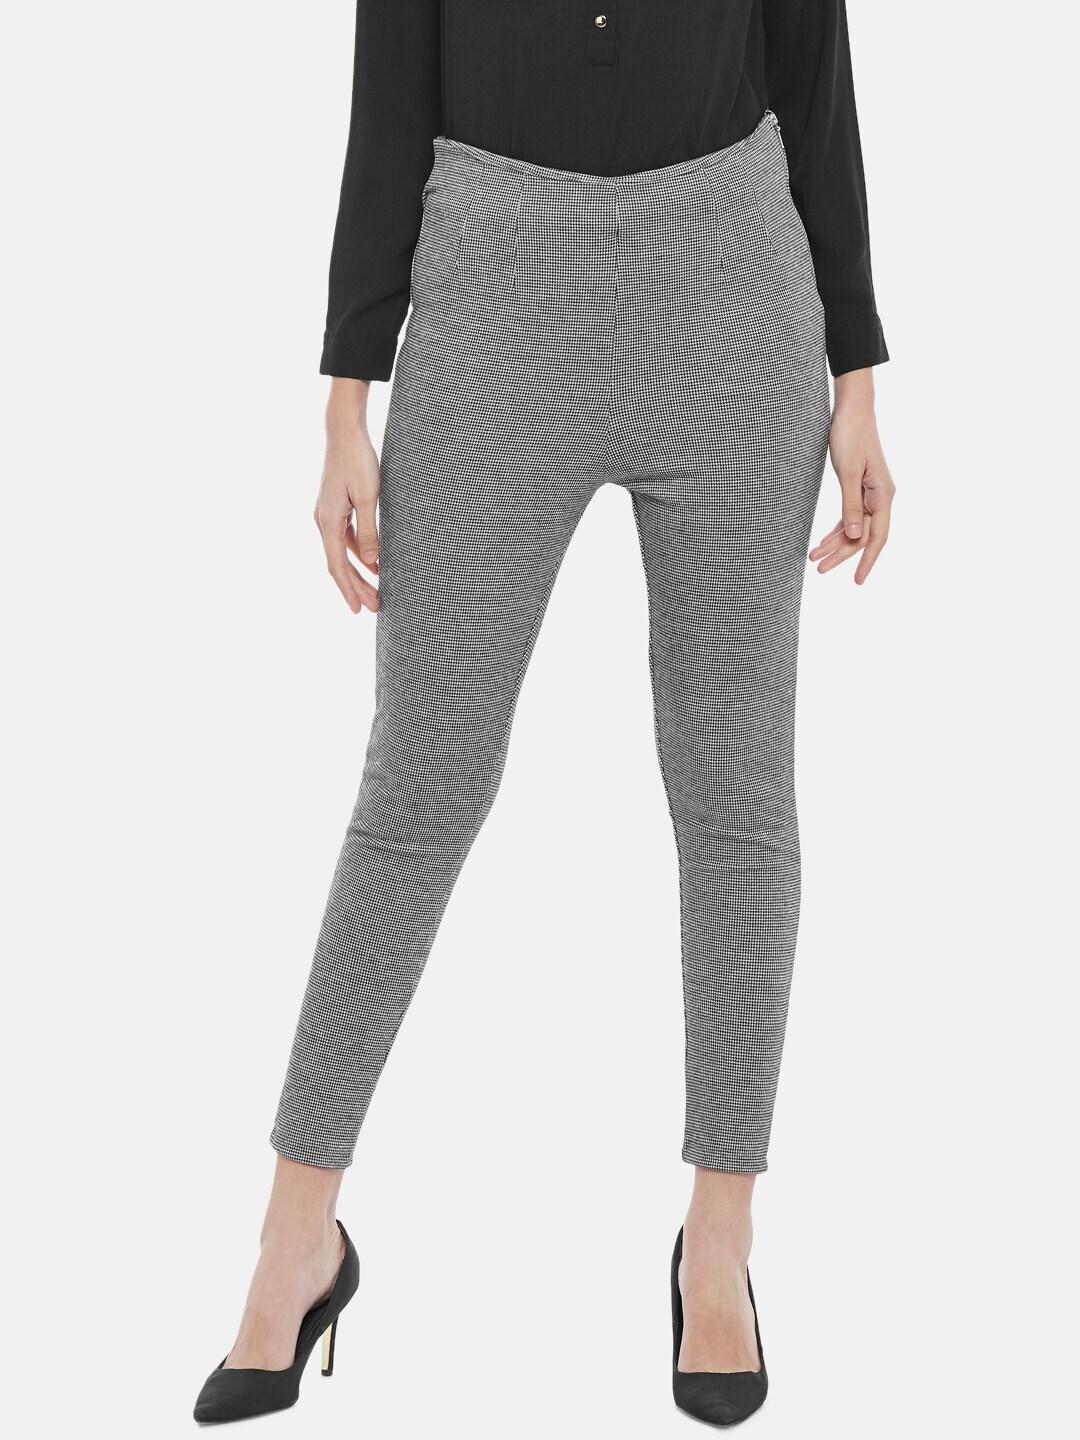 annabelle-by-pantaloons-women-grey-houndstooth-printed-skinny-fit-treggings